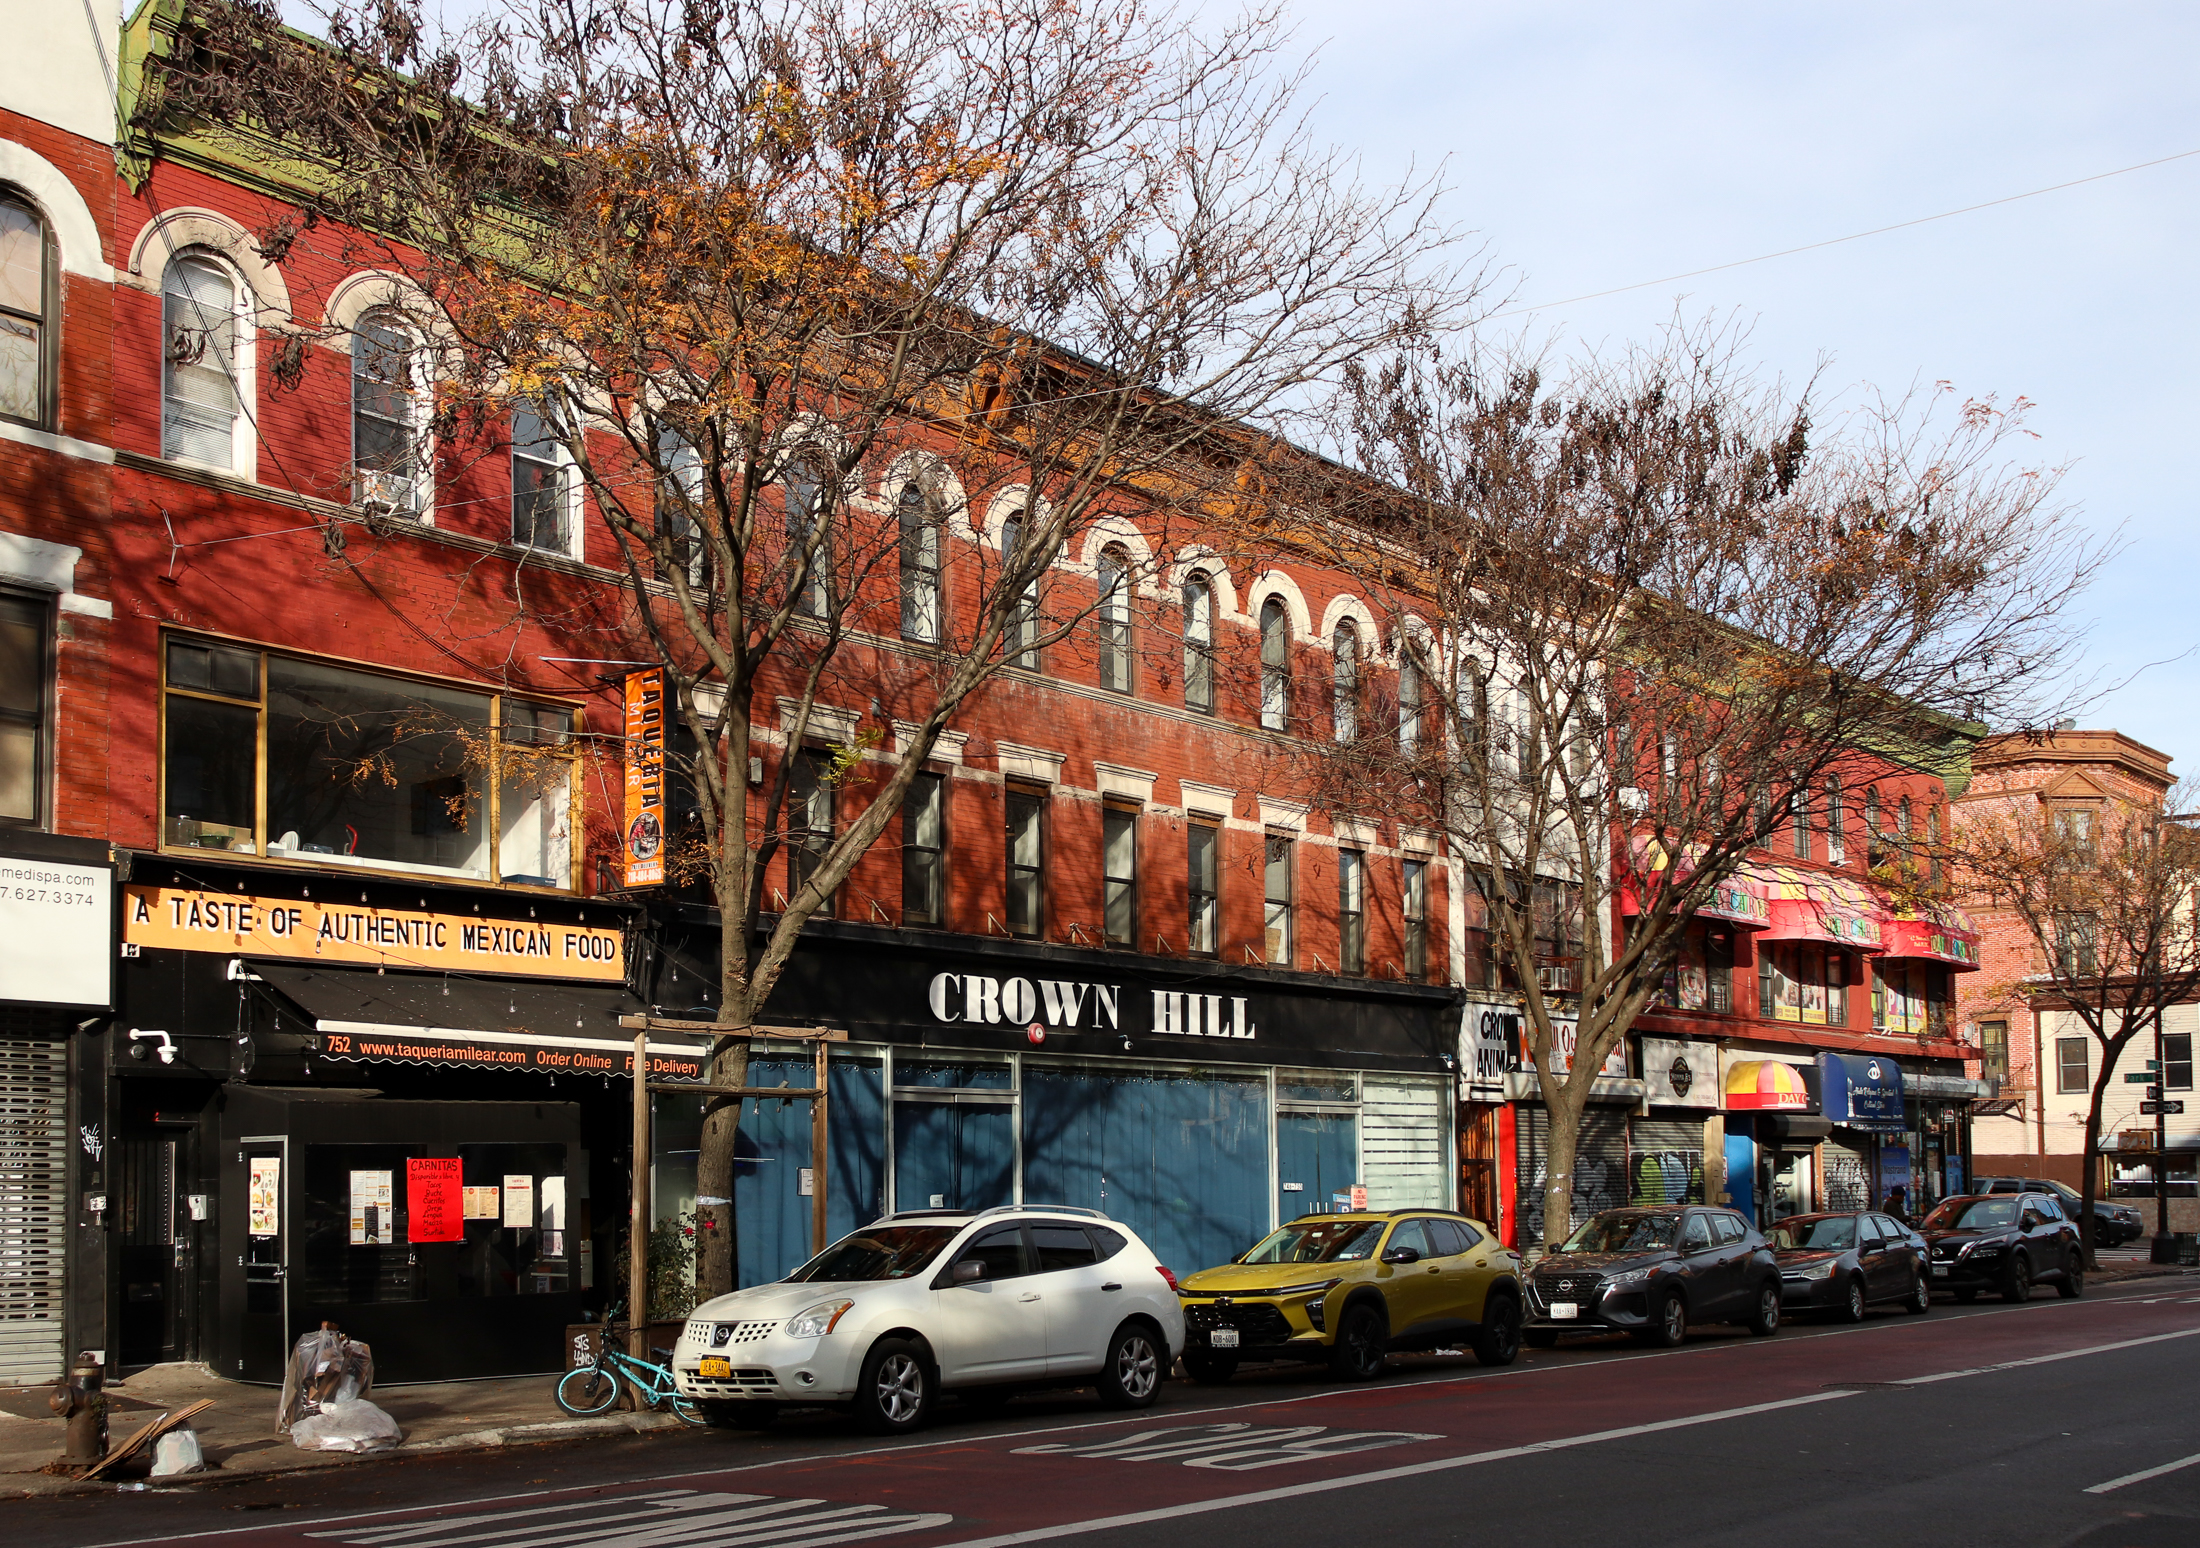 view along nostrand showing the brick buildng with crown hill sign